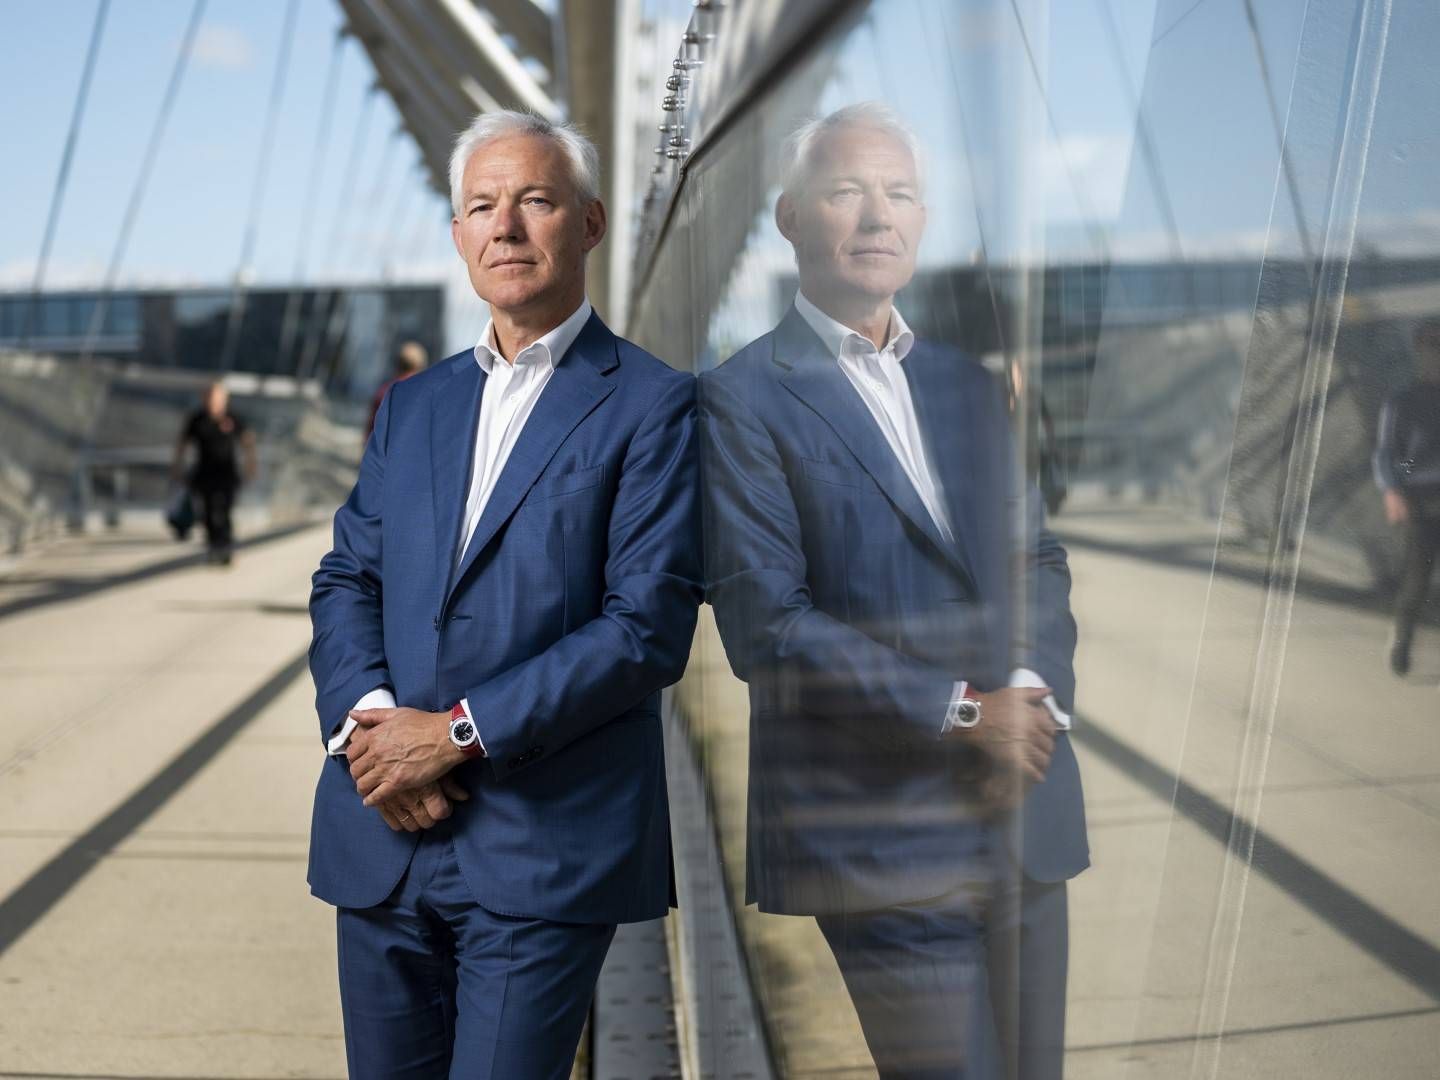 Sverre Thornes is the CEO of Norway's largest pension provider, KLP. | Photo: KLP / PR